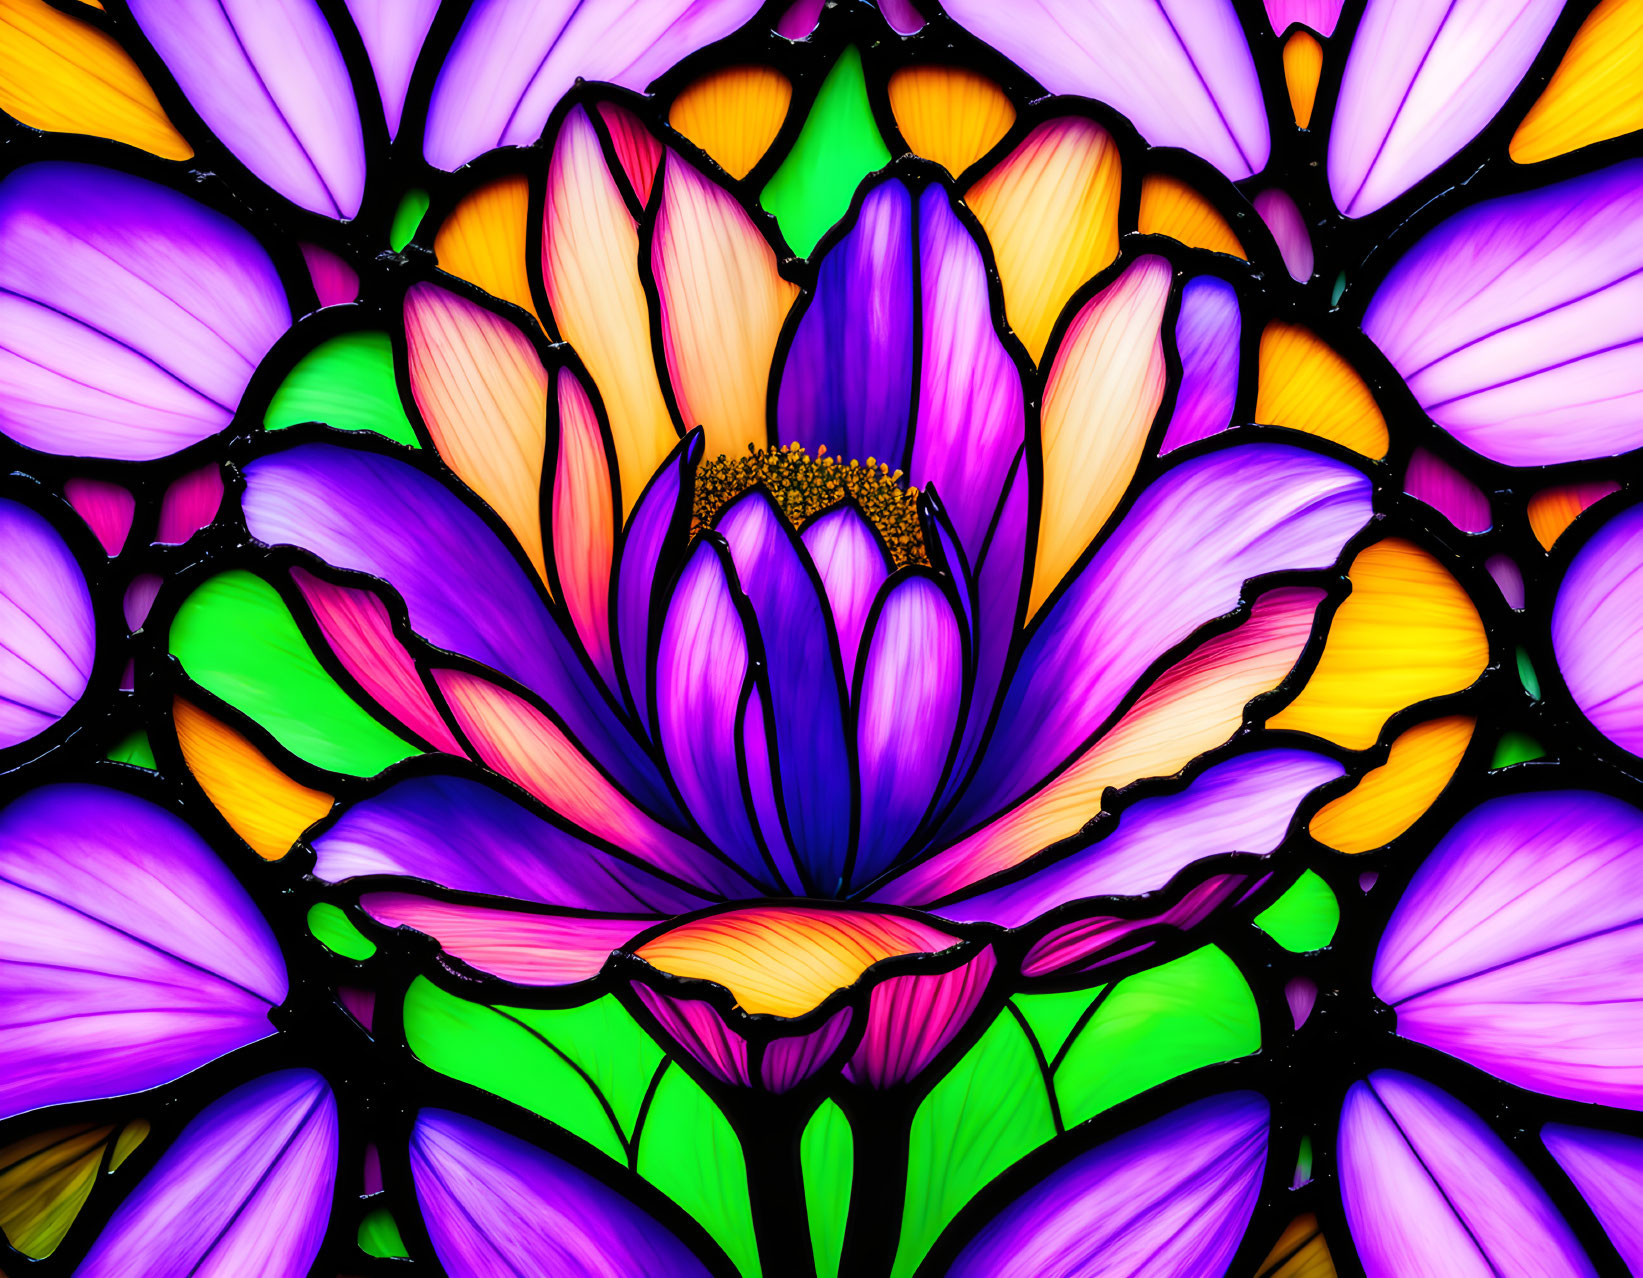 Colorful Flower Stained Glass Design in Purple, Yellow, and Pink